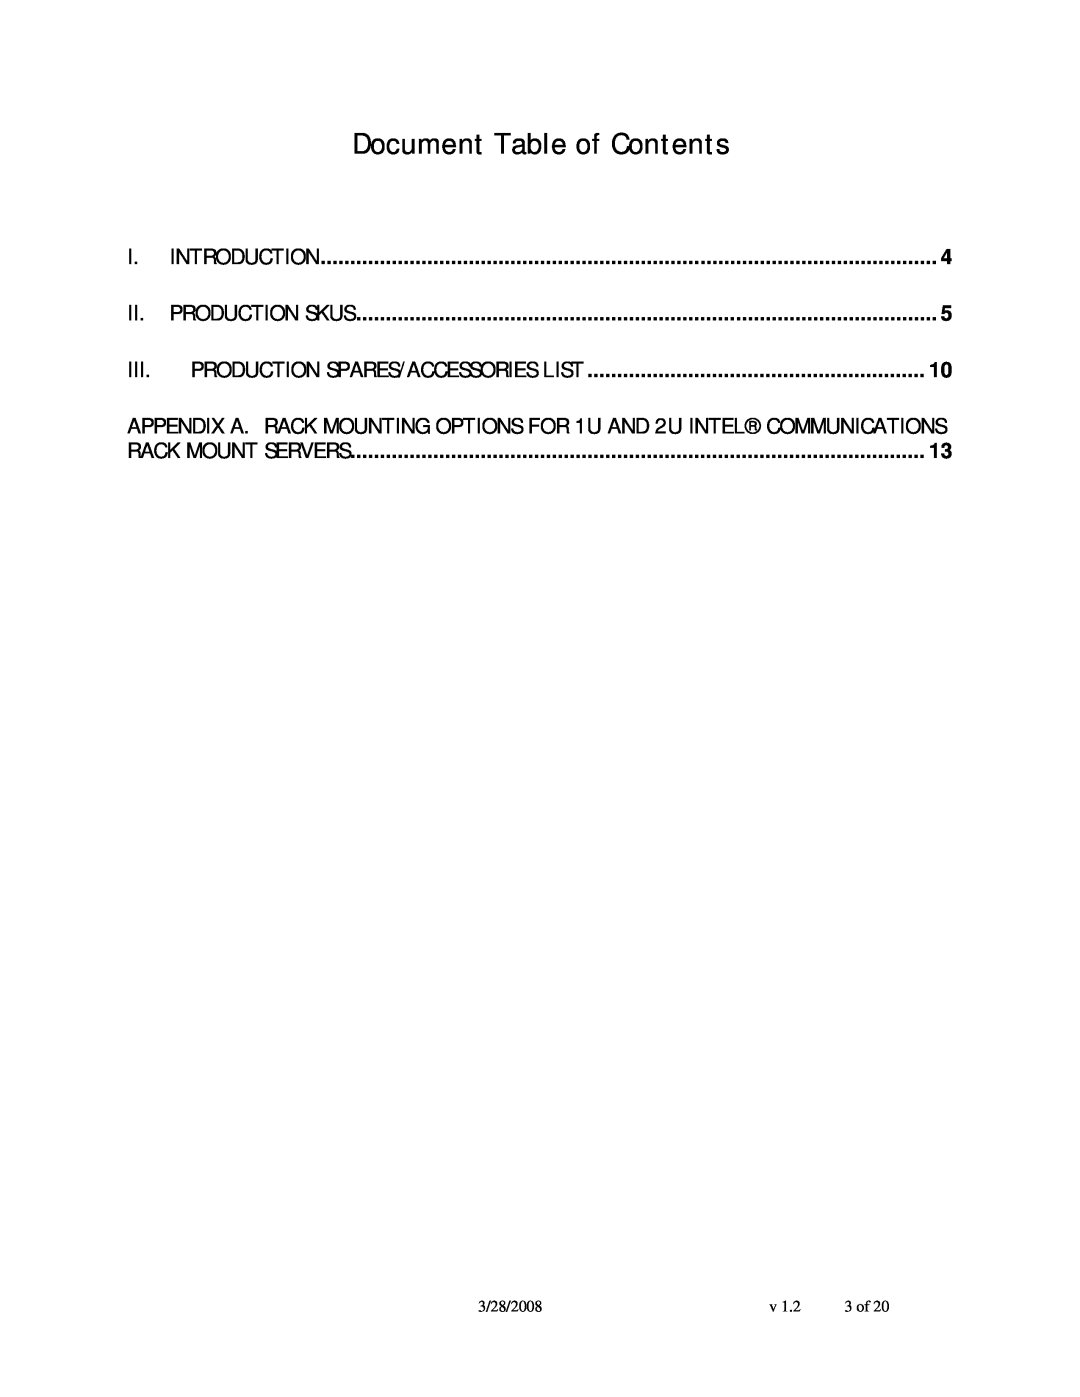 Intel TIGH2U Document Table of Contents, Introduction, Production Skus, Production Spares/Accessories List, 3/28/2008 